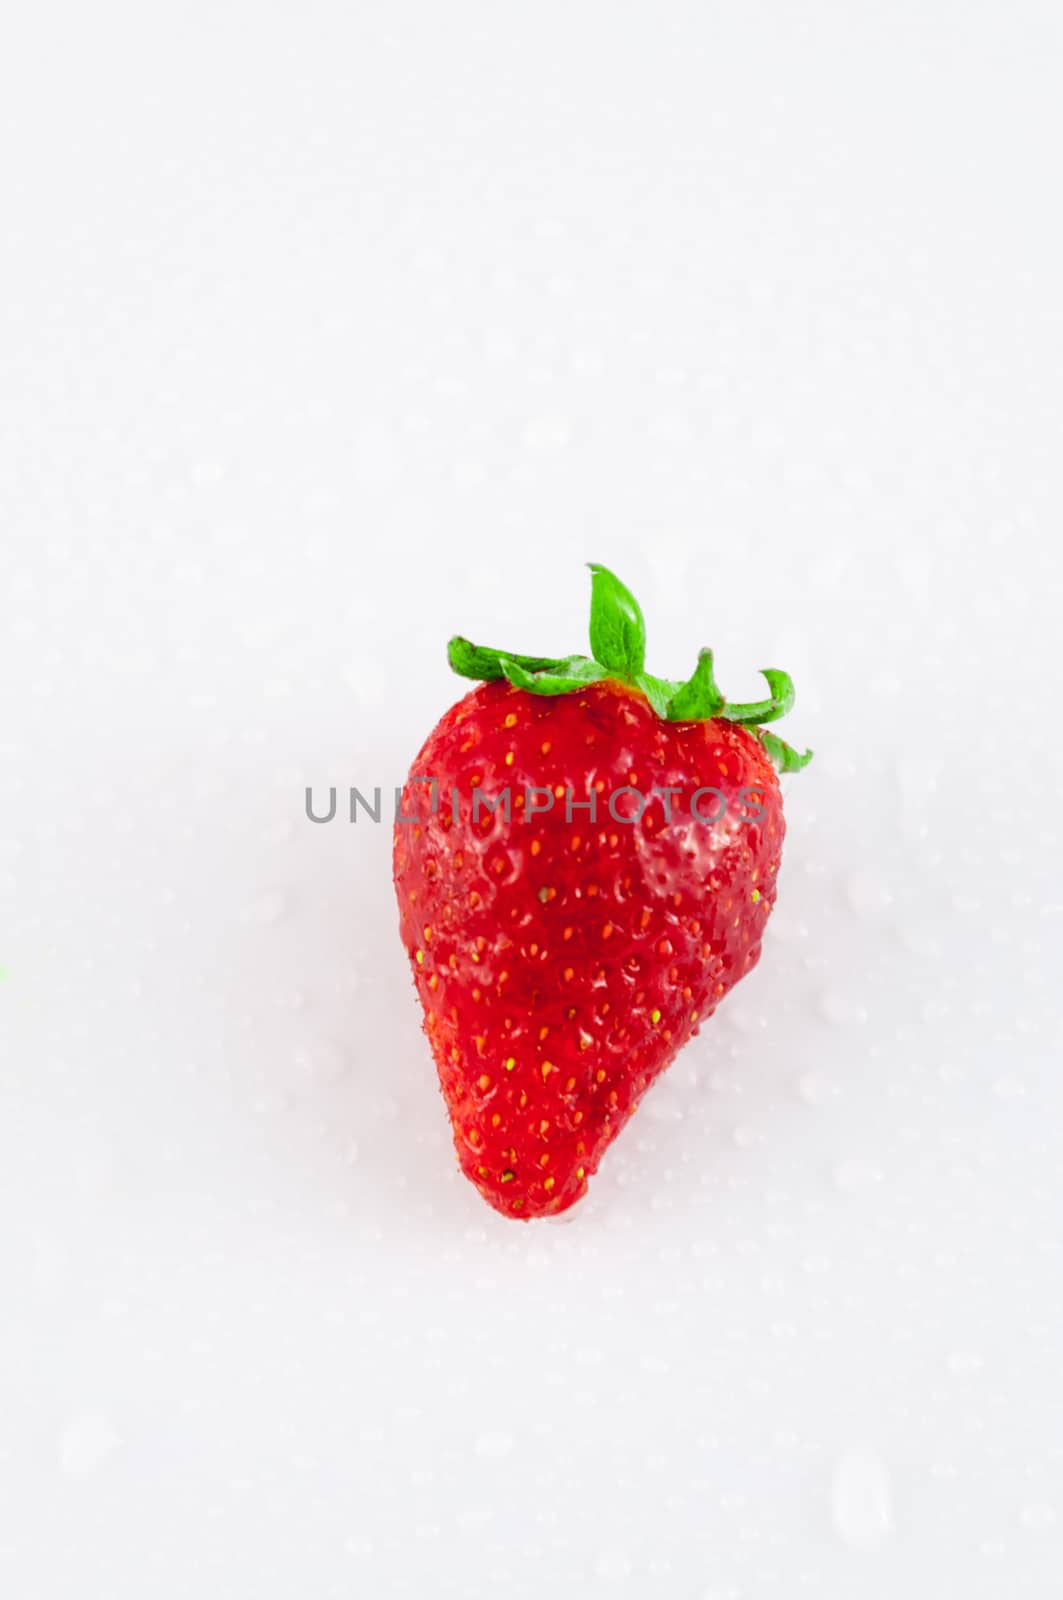 Closeup of strawberry with dew drops on white background